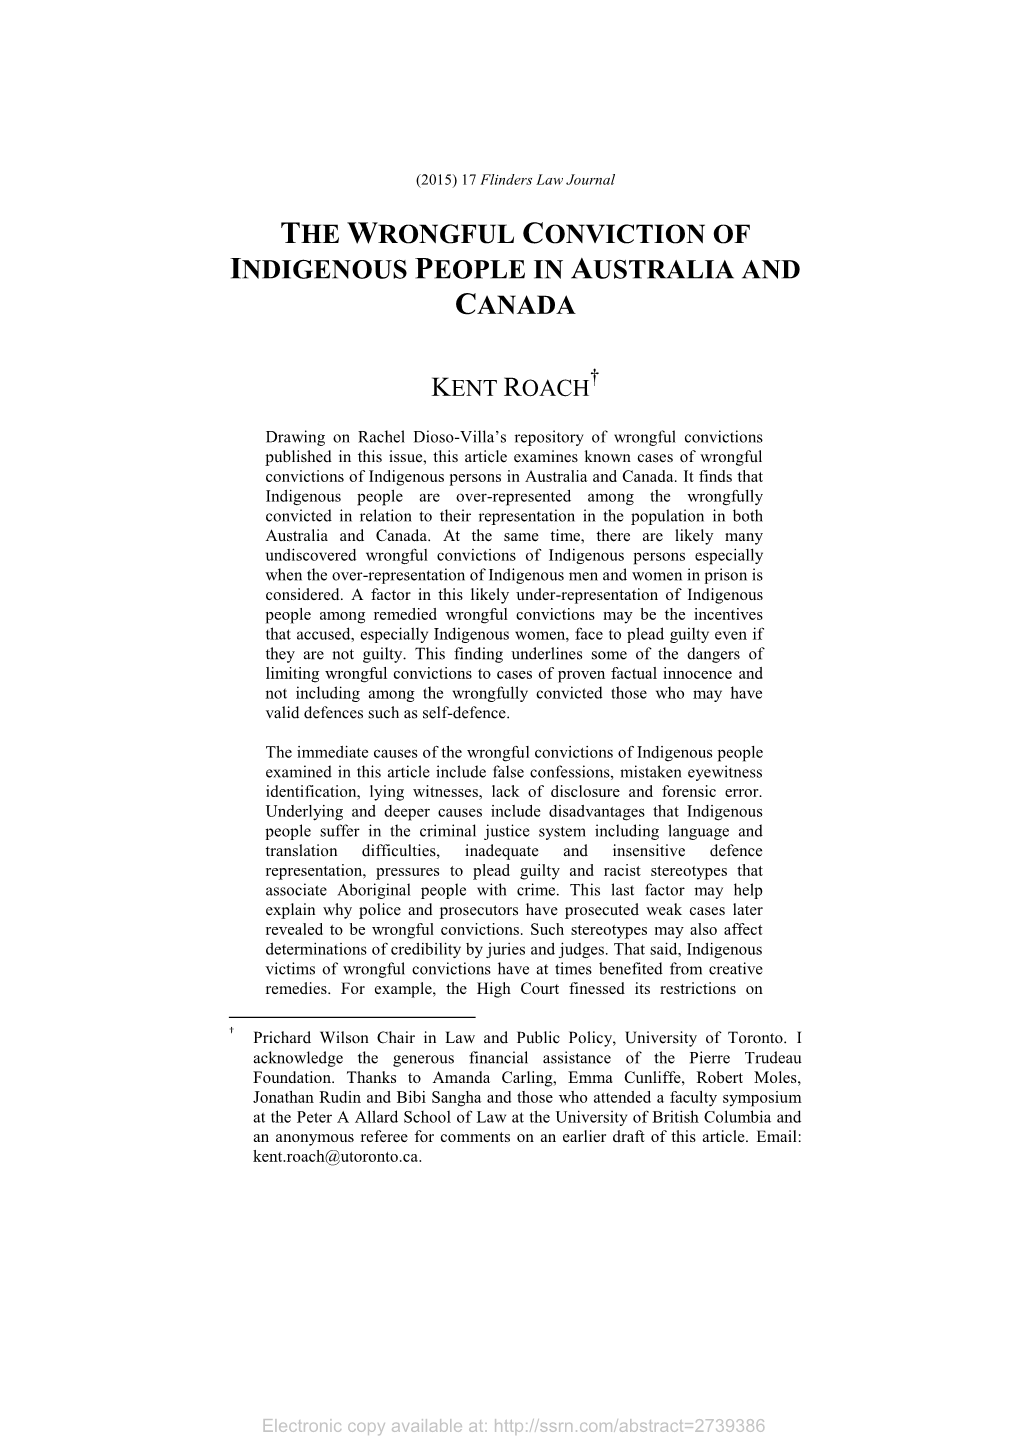 The Wrongful Conviction of Indigenous People in Australia and Canada